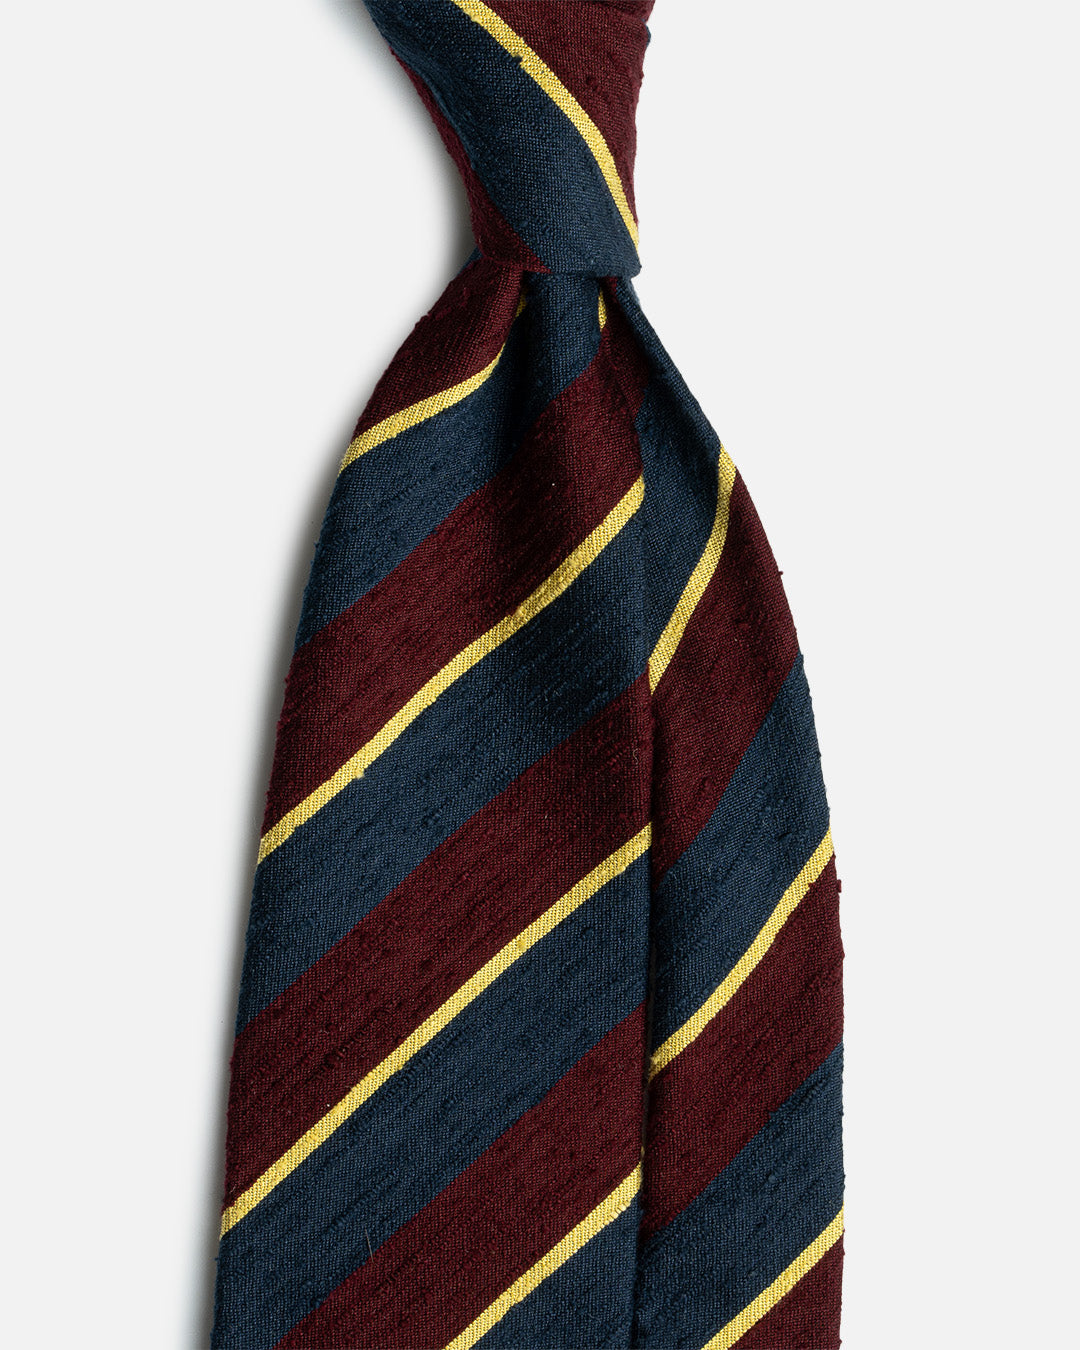 Drake’s archival tie collection for The Decorum⁠ - Red/Navy